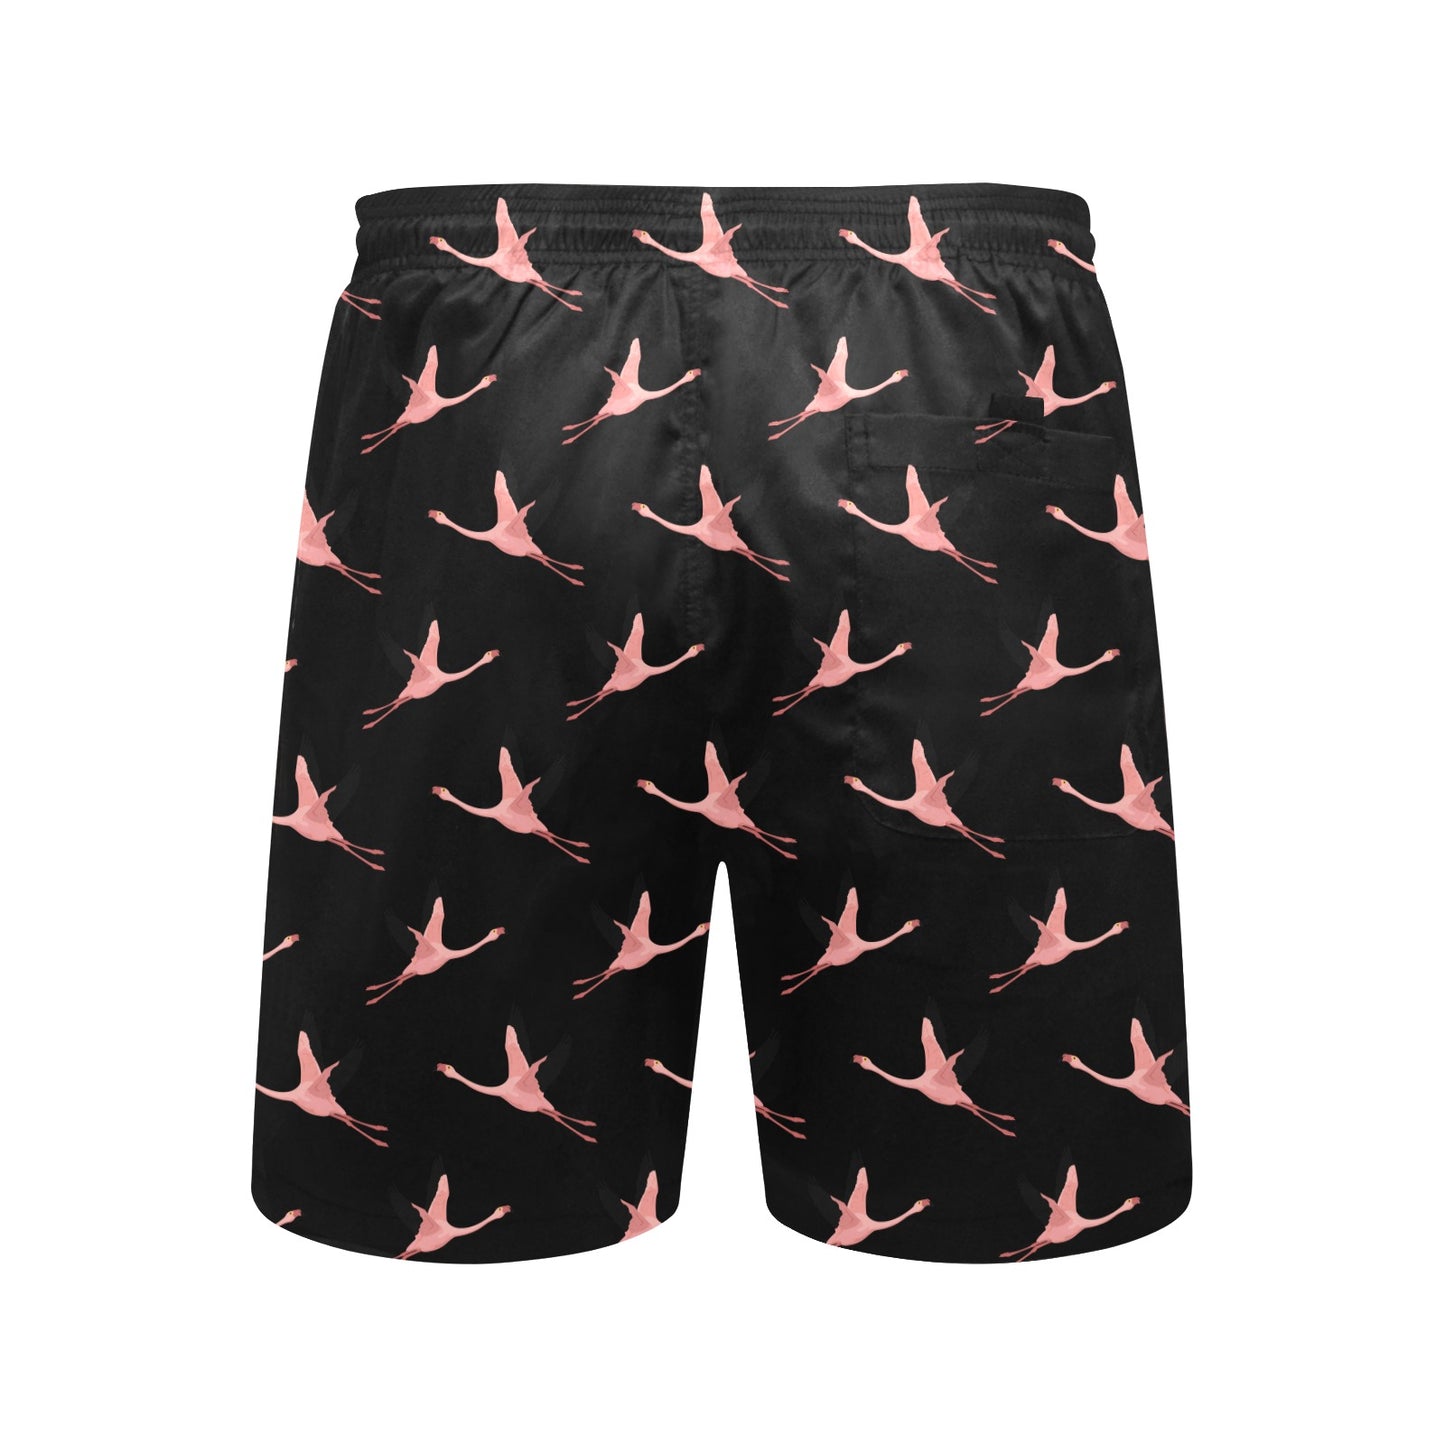 Load image into Gallery viewer, Flying Flamingos Black Board Shorts
